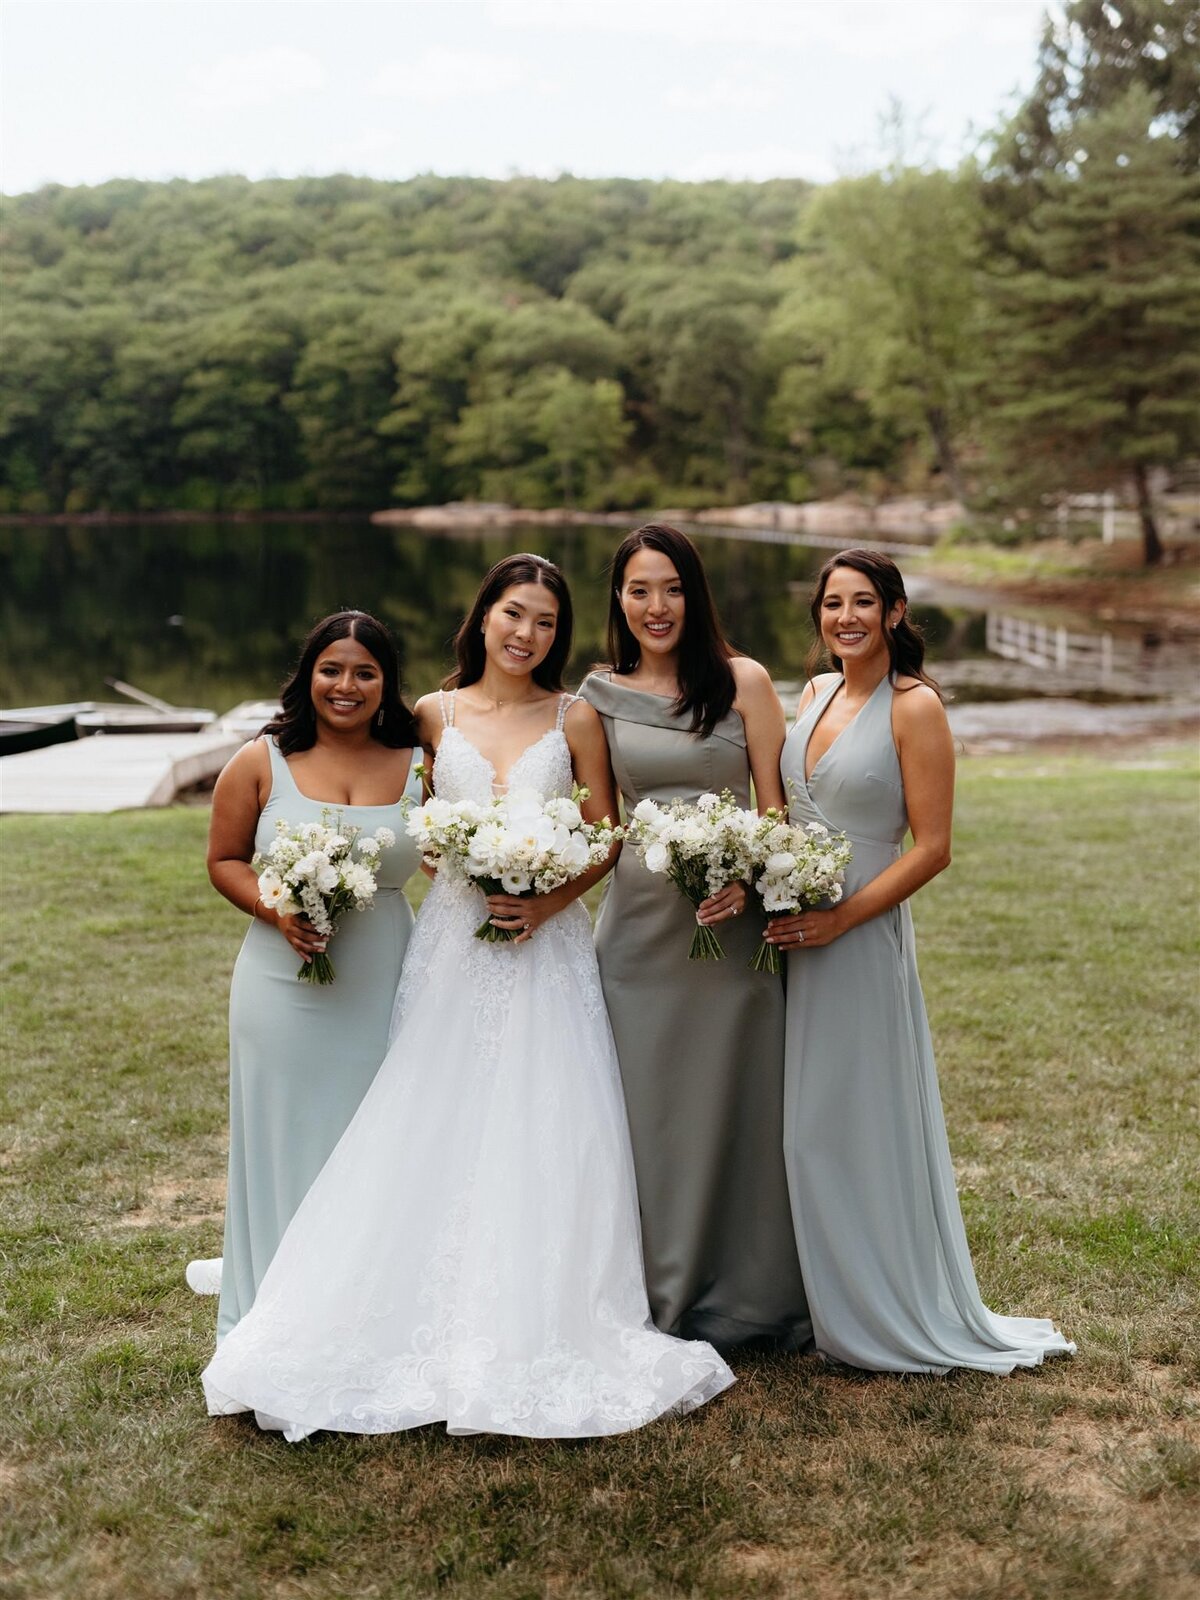 Bride and bridesmaids in floor-length sage green dresses pose on grass in front of lake and trees at Cedar Lakes Estate venue in Catskills